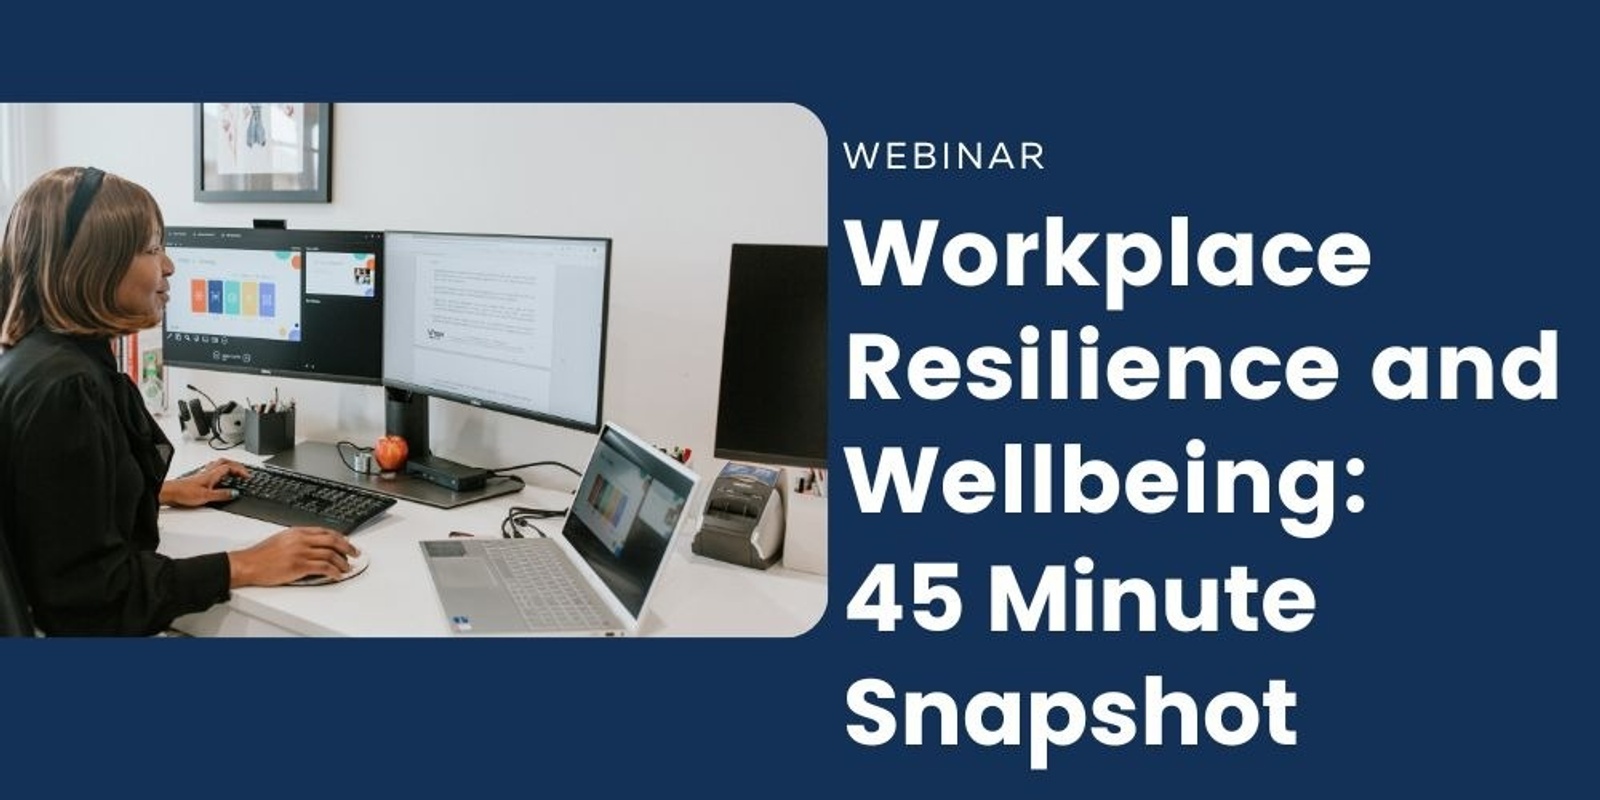 Workplace Resilience and Wellbeing - 45 Minute Snapsot